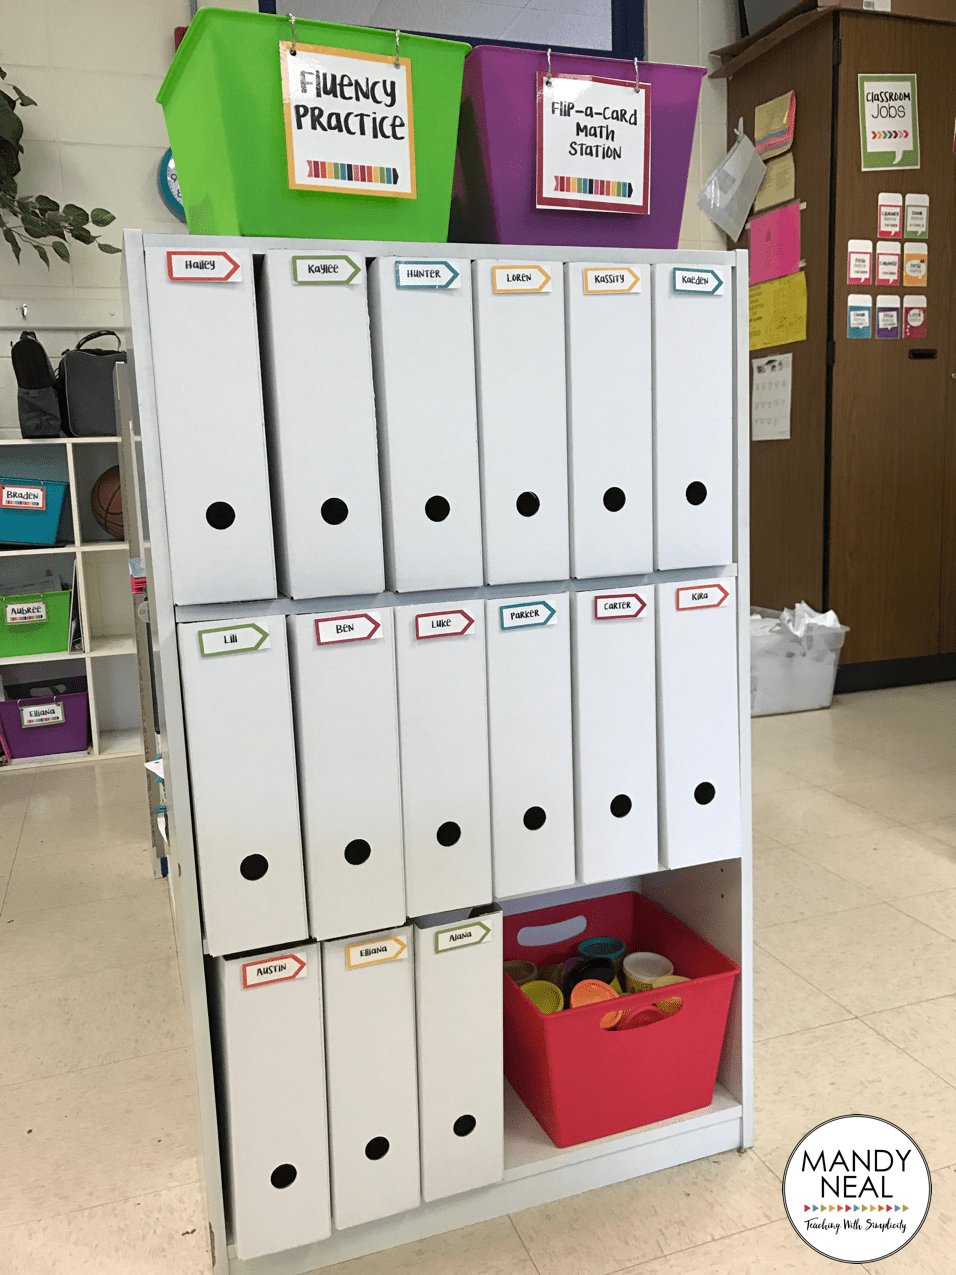 , Flexible Seating Classroom ~ A How-to-Guide